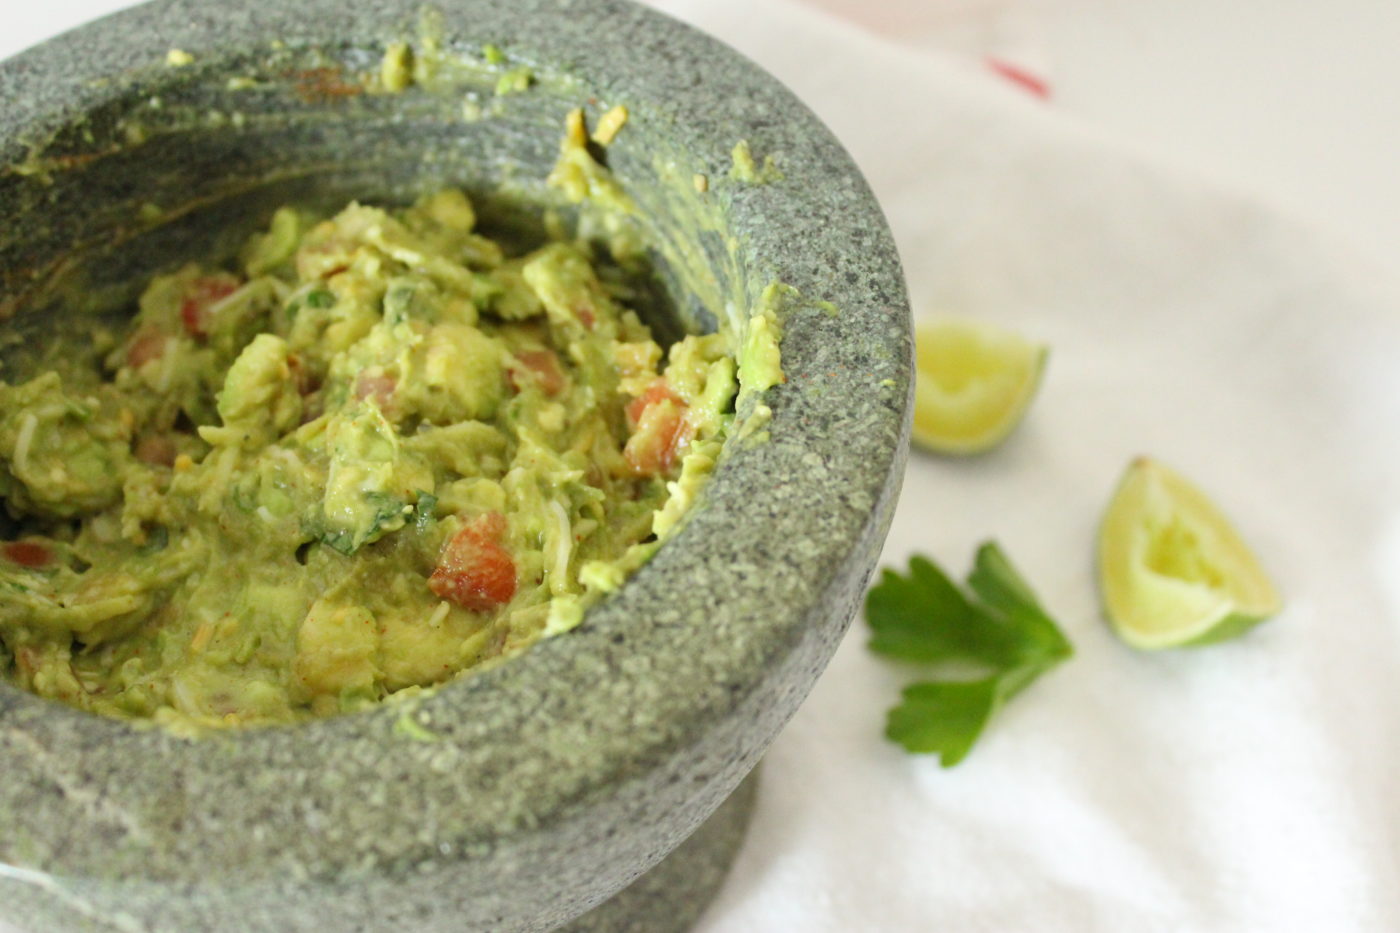 After trying my own easy guacamole recipe, I can honestly say that I'll give guacamole a chance now. Well, maybe.